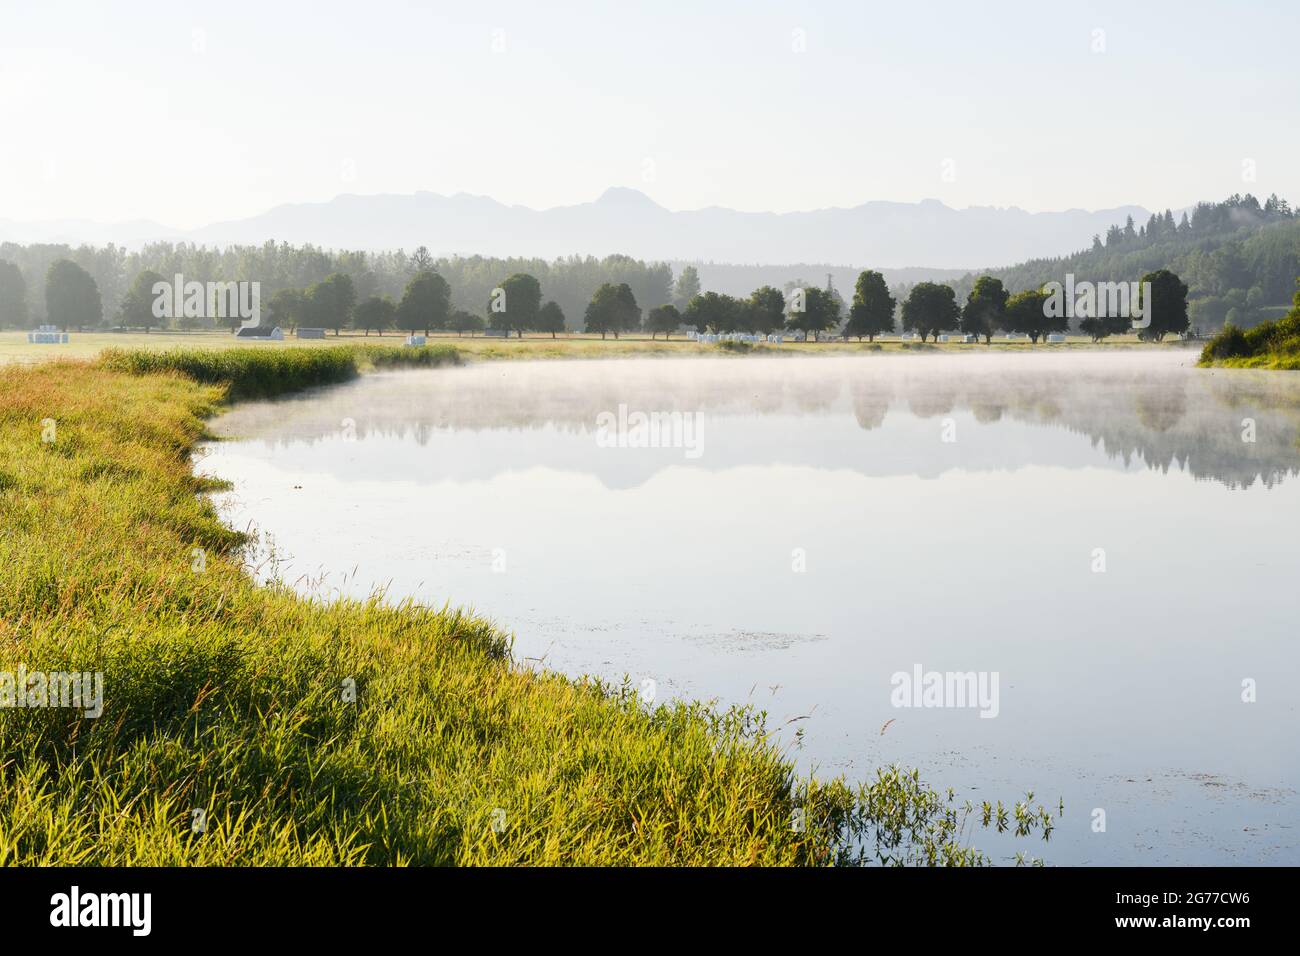 Sikes Lake near Carnation in the Snoqualmie Valley has a light coating of mist on a summer morning as the landscape subtly reflects in the calm water Stock Photo